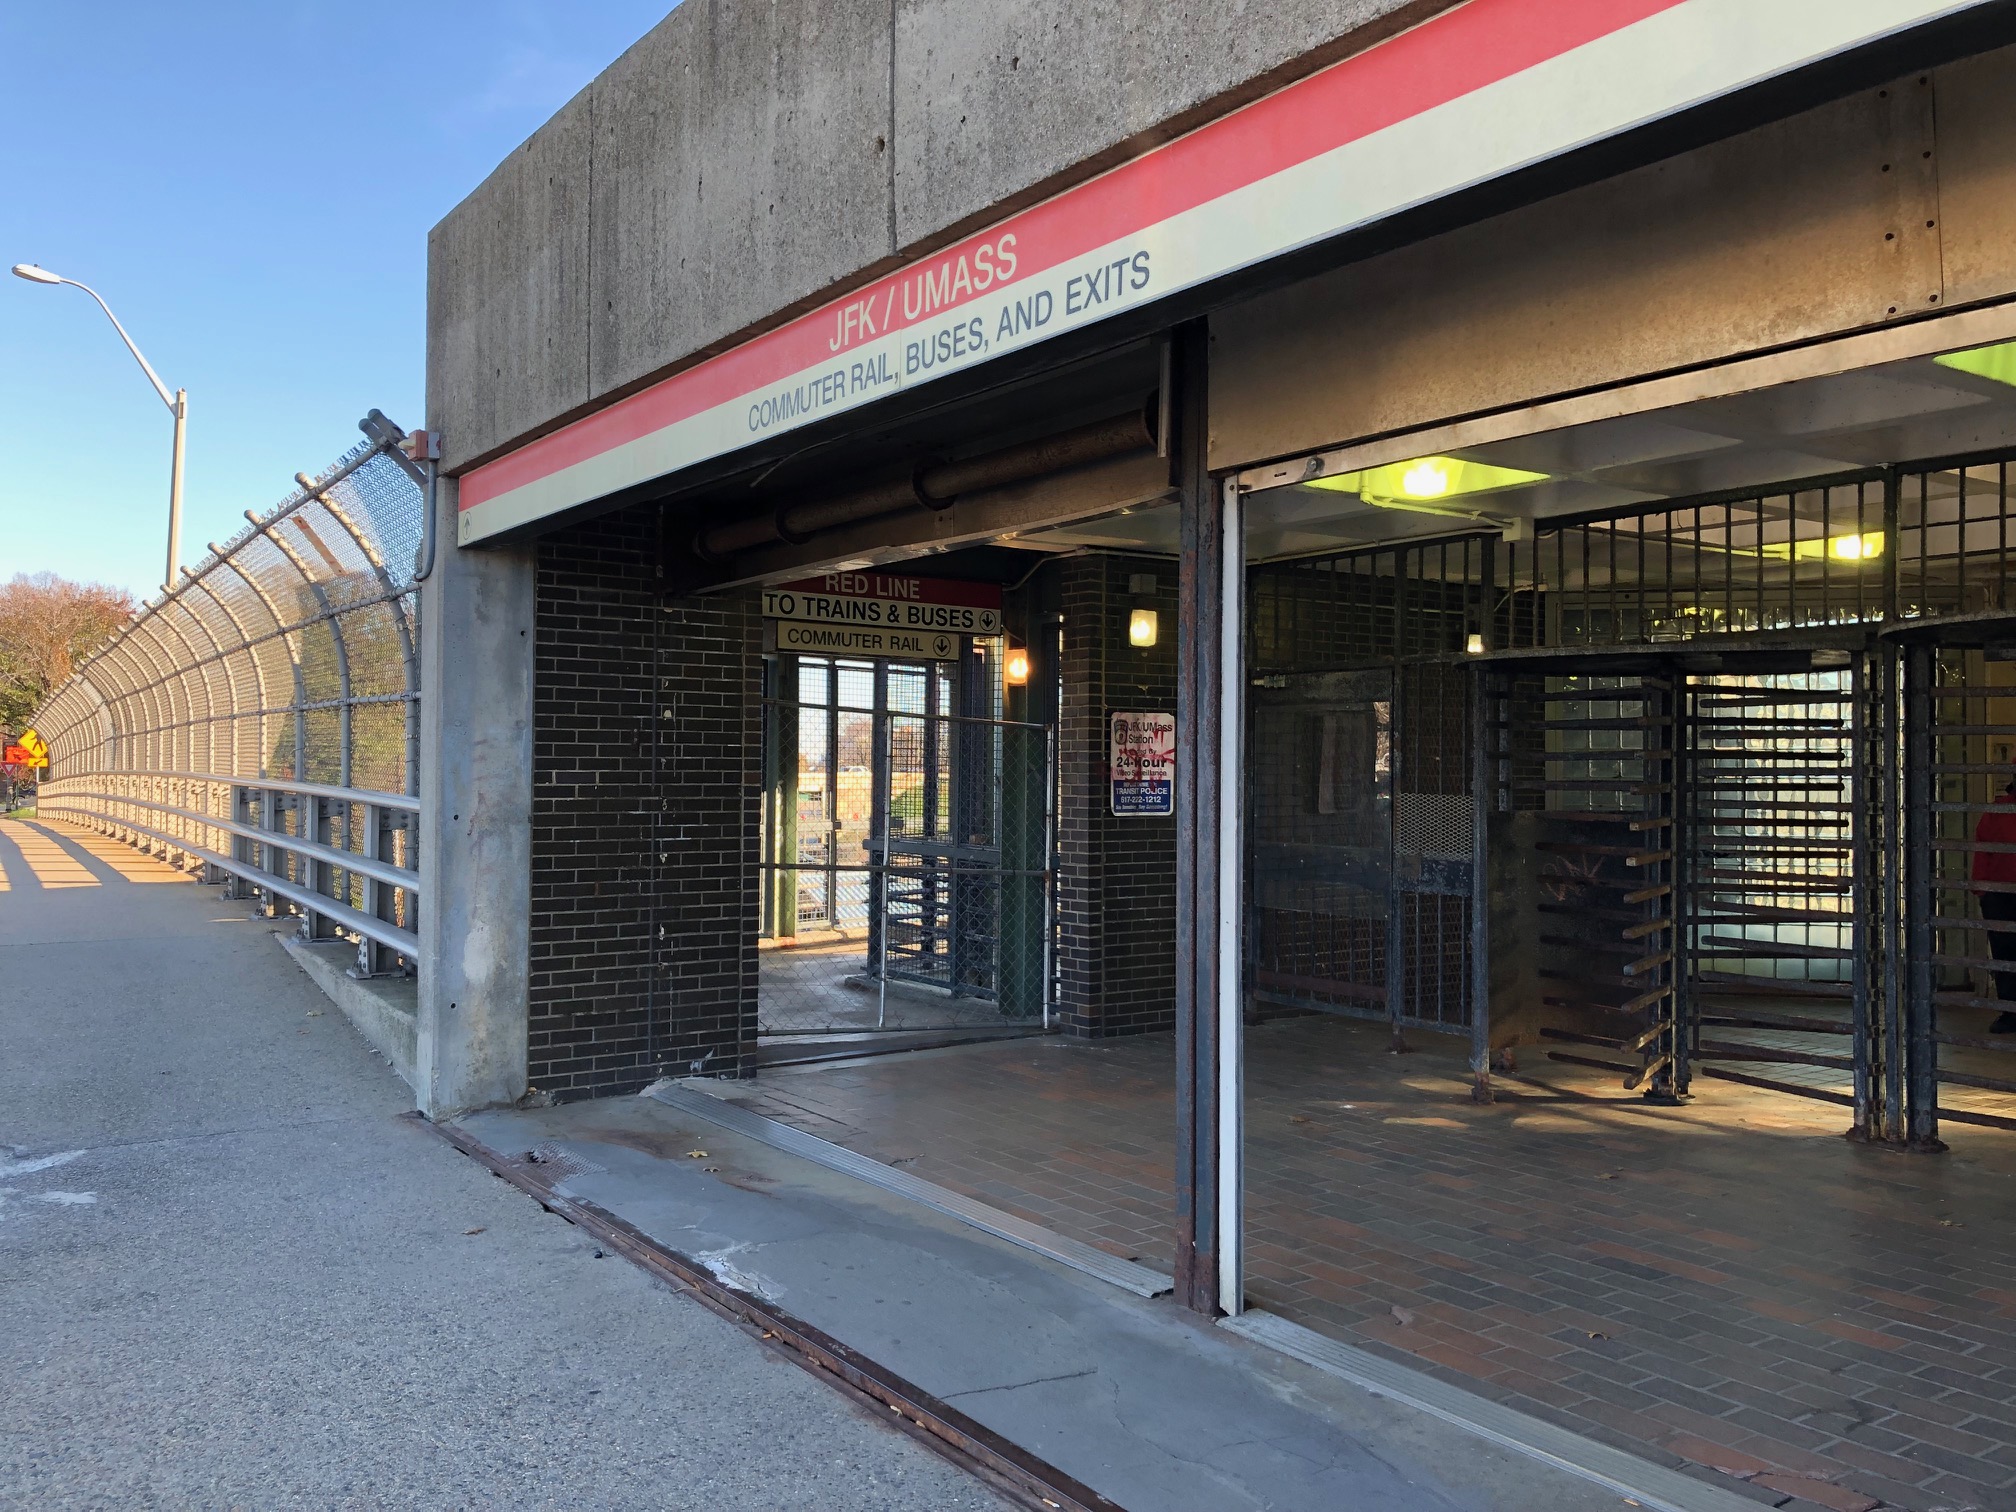 A chain-link fence blocks the entrance to the JFK/UMass Red Line station.